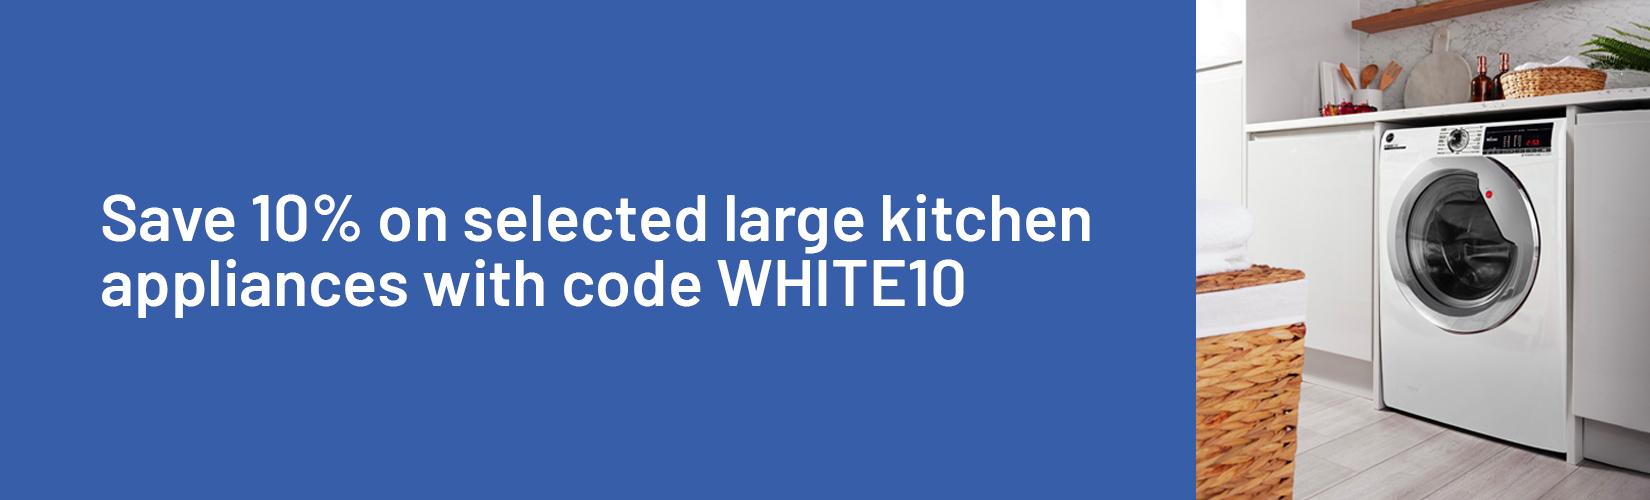 Save 10% on selected large kitchen appliances with code WHITE10.